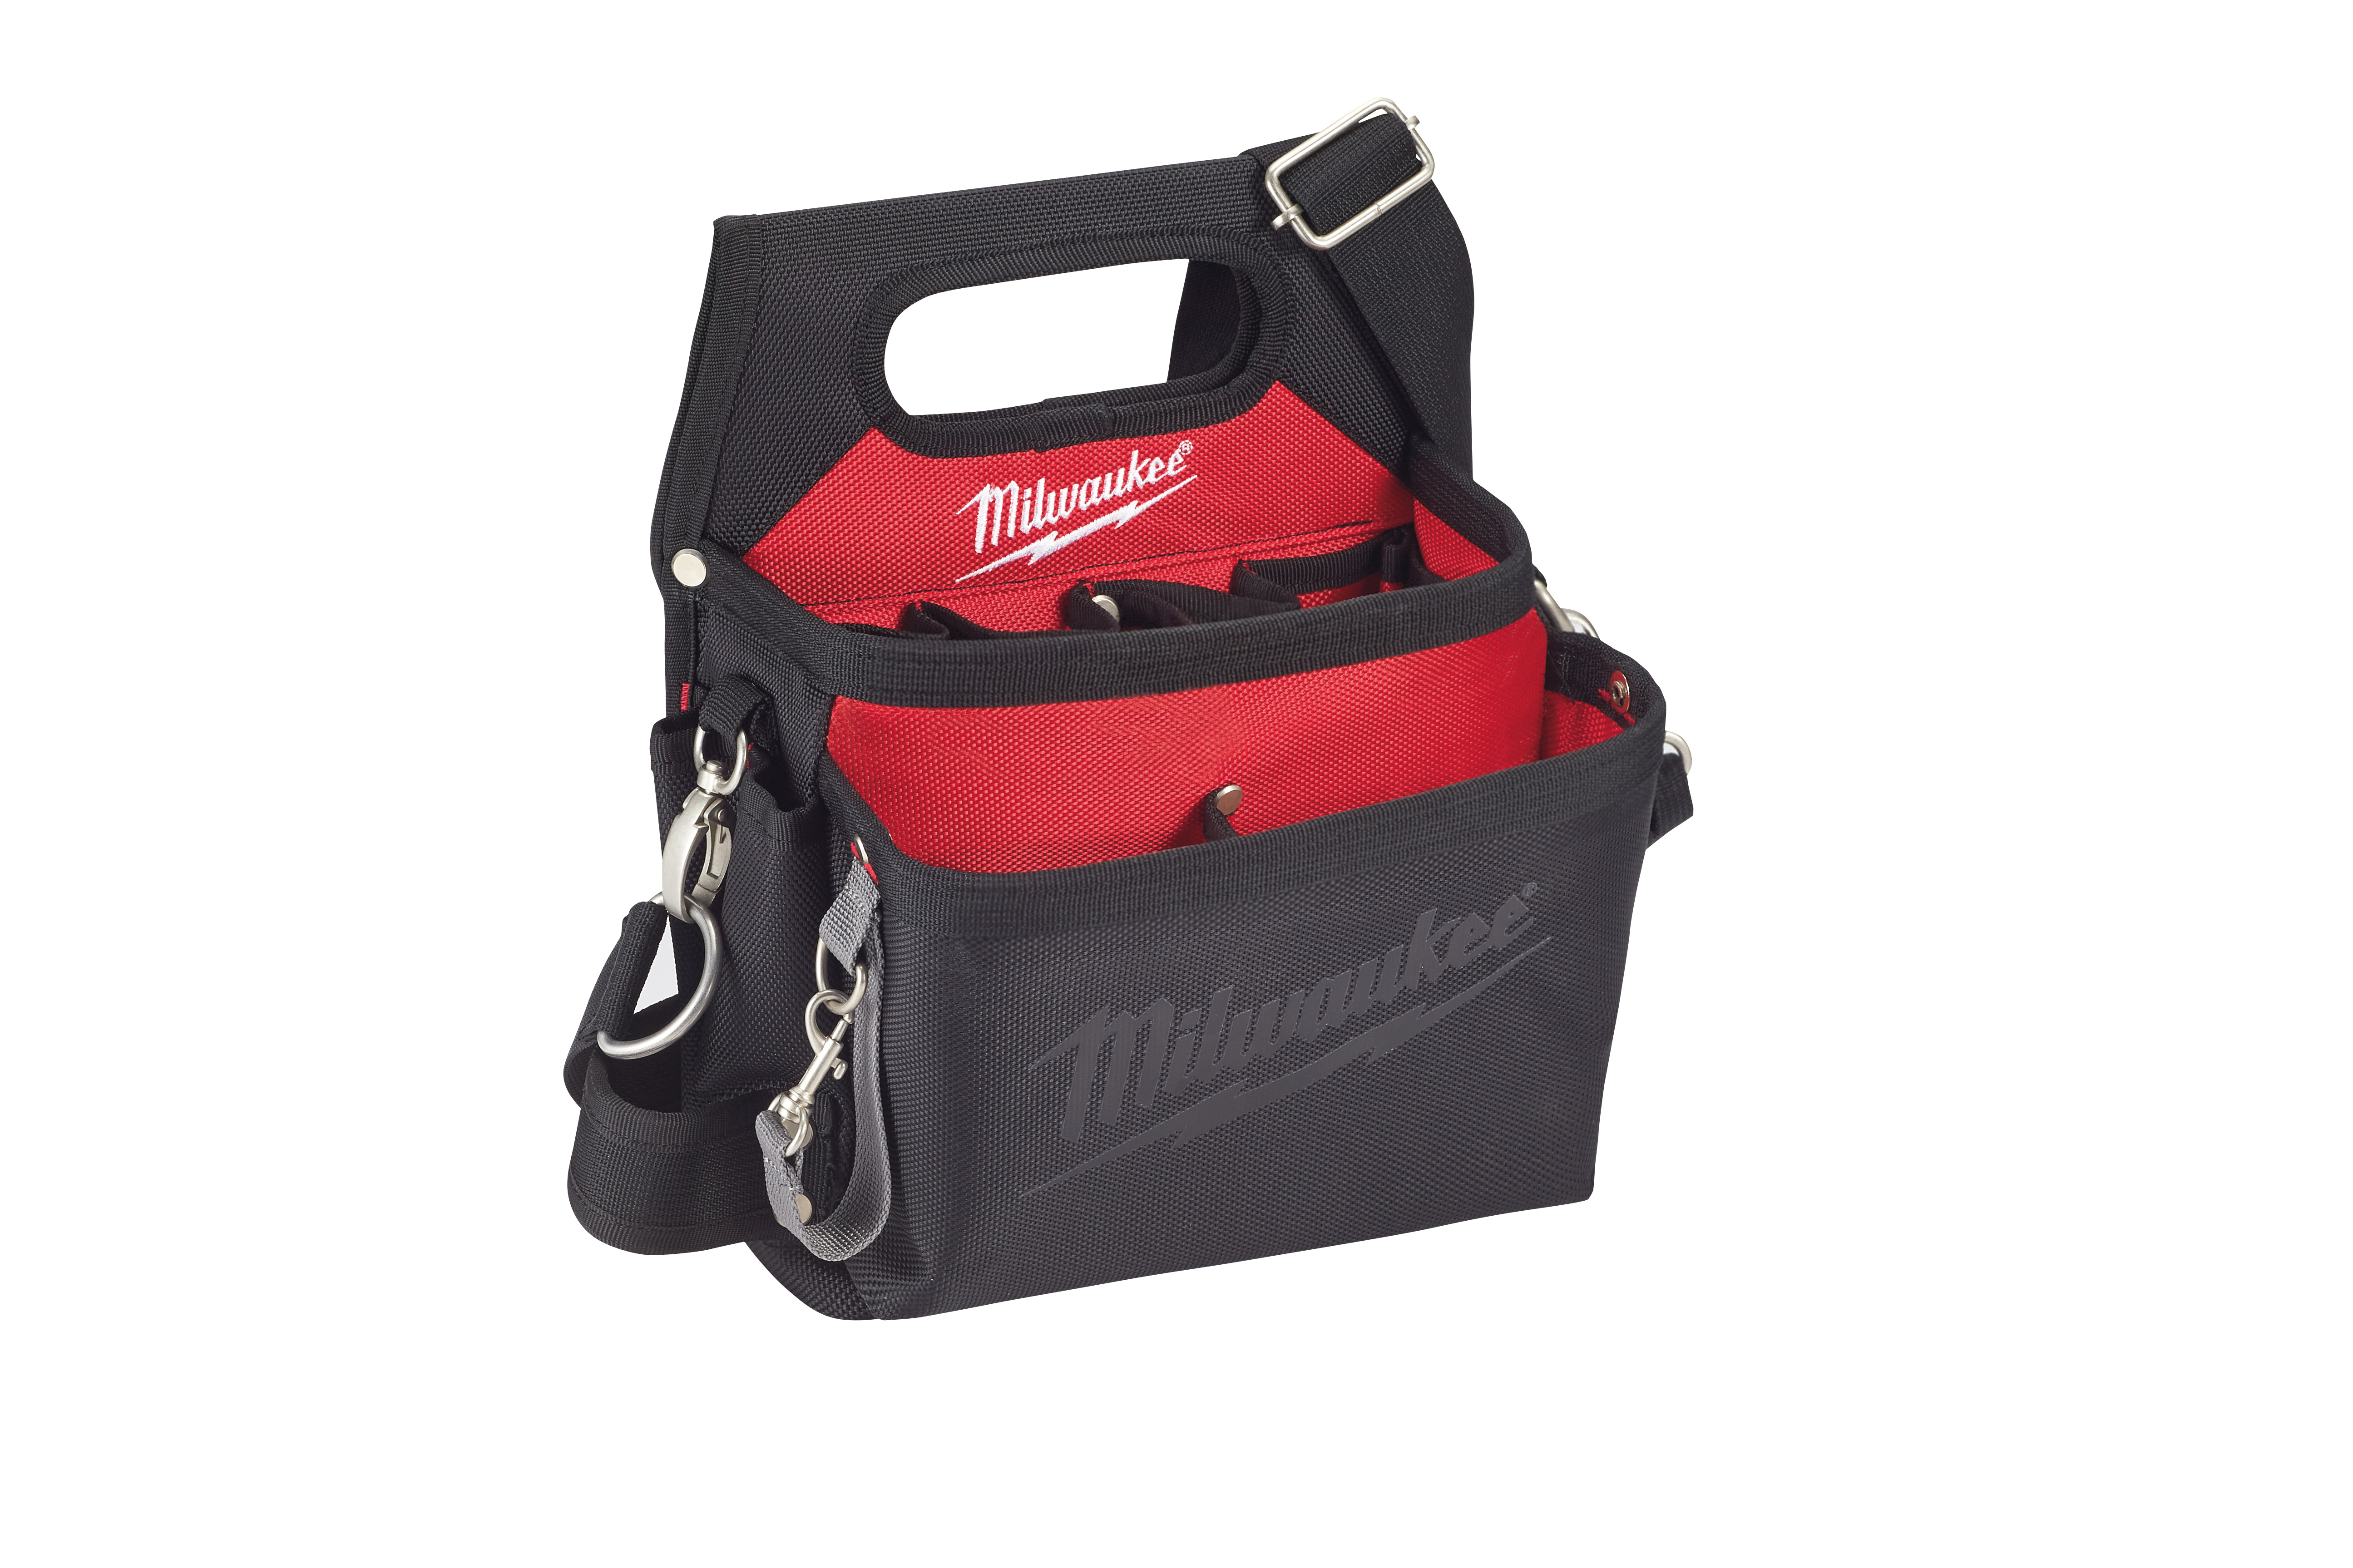 Milwaukee work gear is nothing but heavy duty. Designed with professional tradesmen in mind and built with 1680 denier nylon, riveted seams, and all metal hardware, Milwaukee work gear is up to 5X more durable than competitive products and provides u...